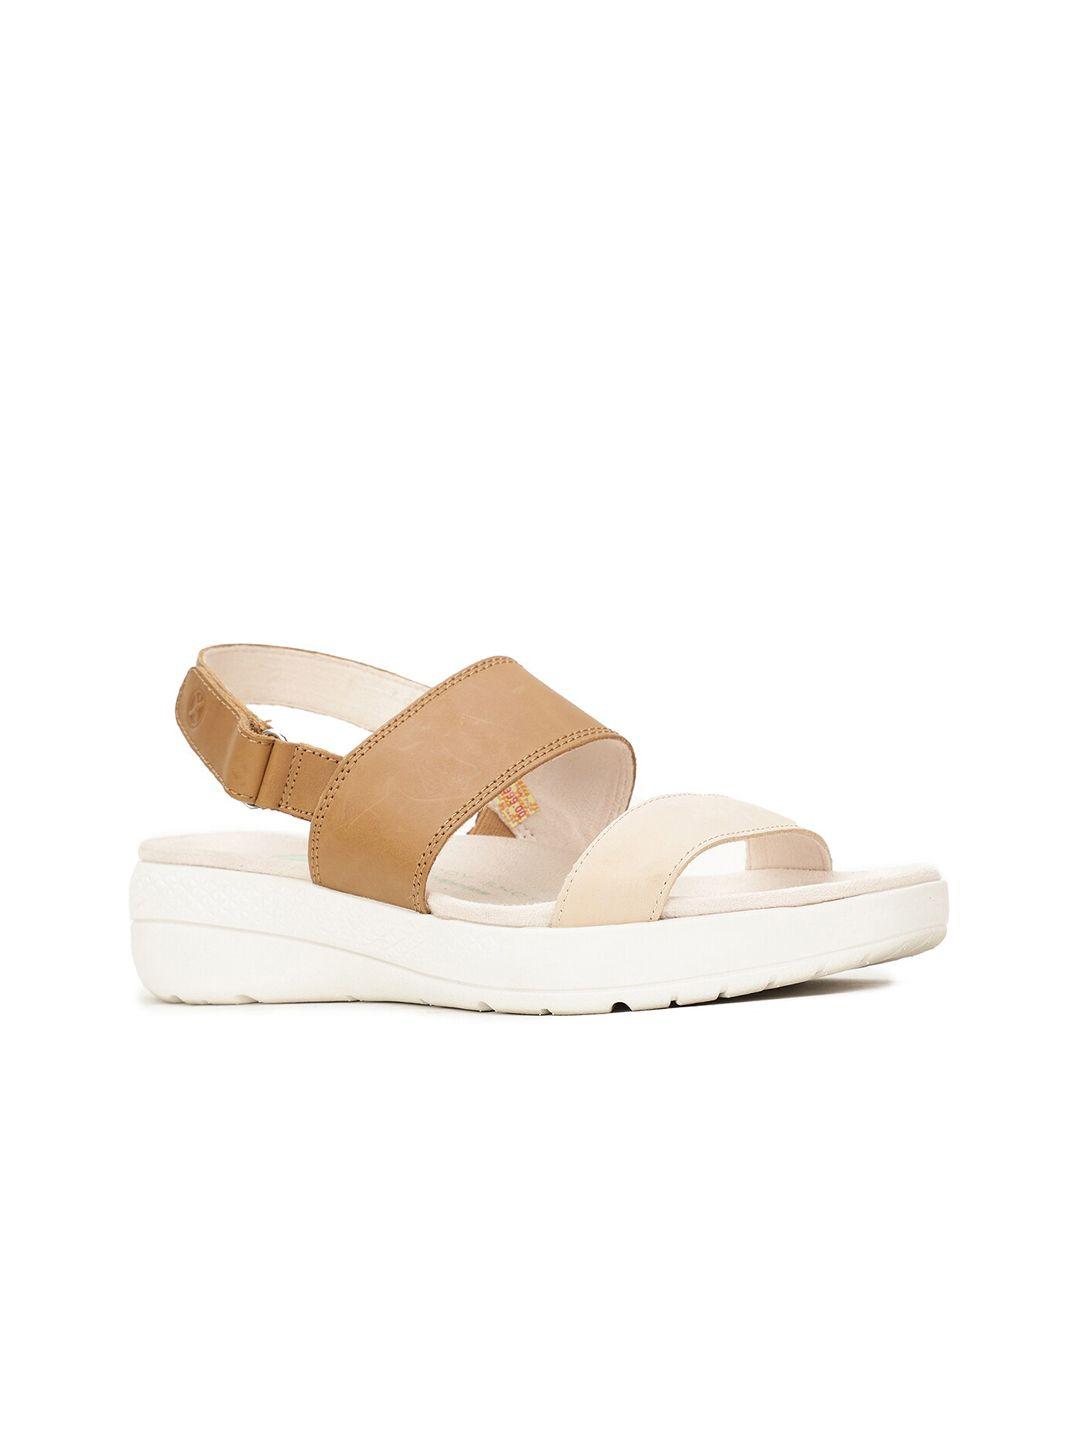 hush-puppies-leather-flat-form-sandals-with-buckles-heels